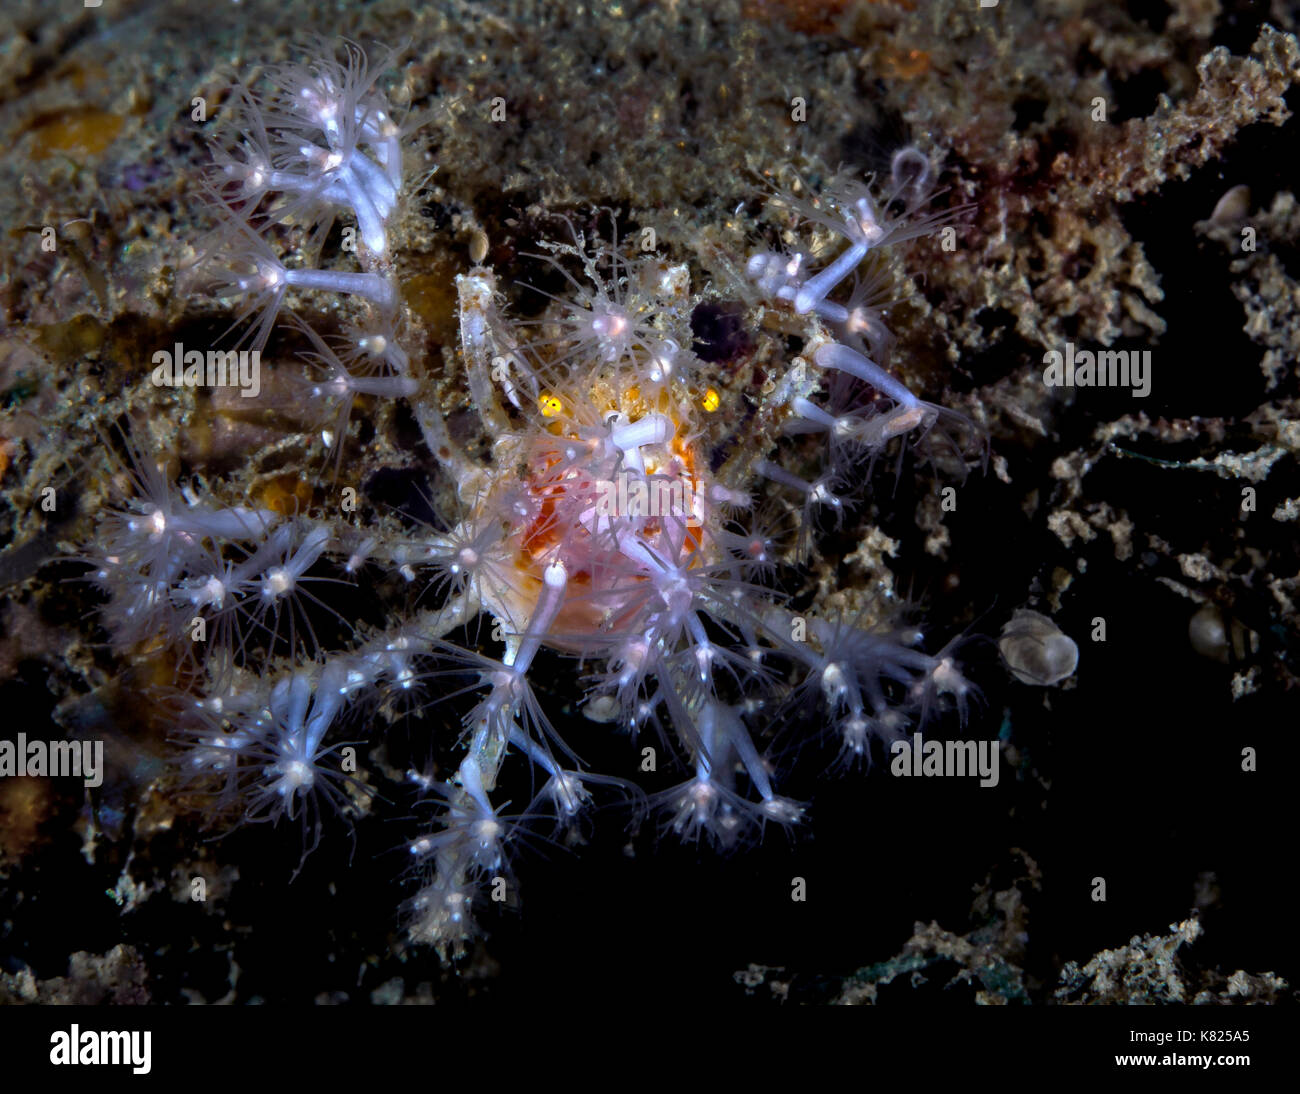 Spider crab decorated with coral polyps. Ambon, Indonesia. Stock Photo